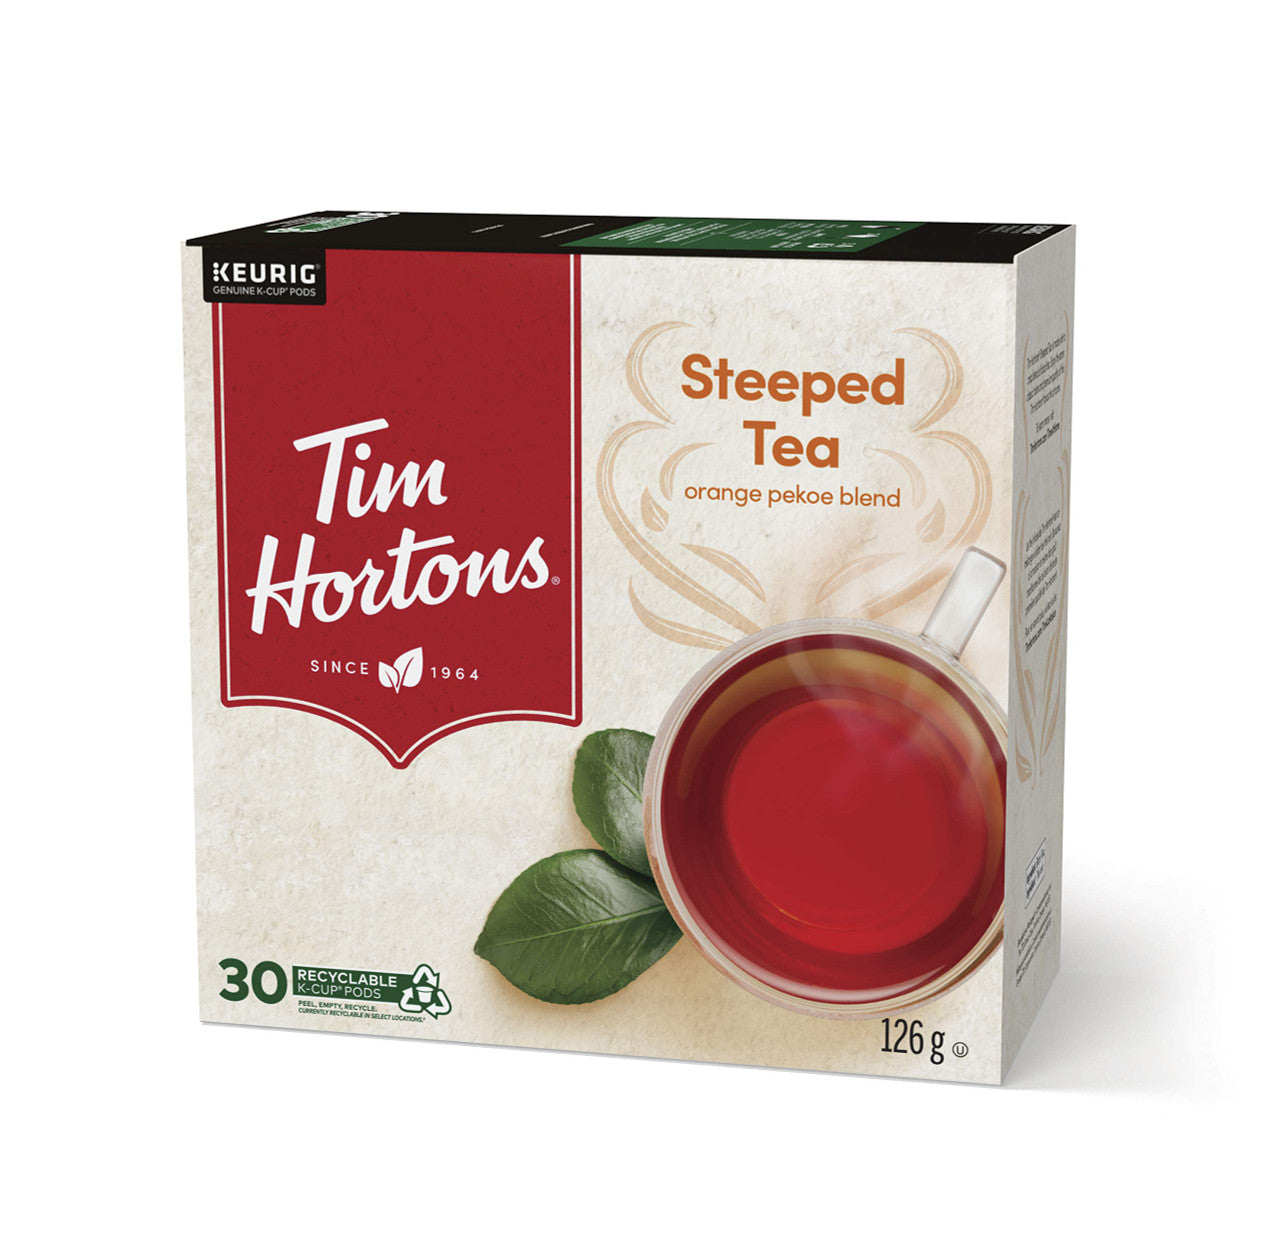 Tim Hortons Steeped Tea - Orange Pekoe Blend, 30ct, 126g/4.4 oz, {Imported from Canada}